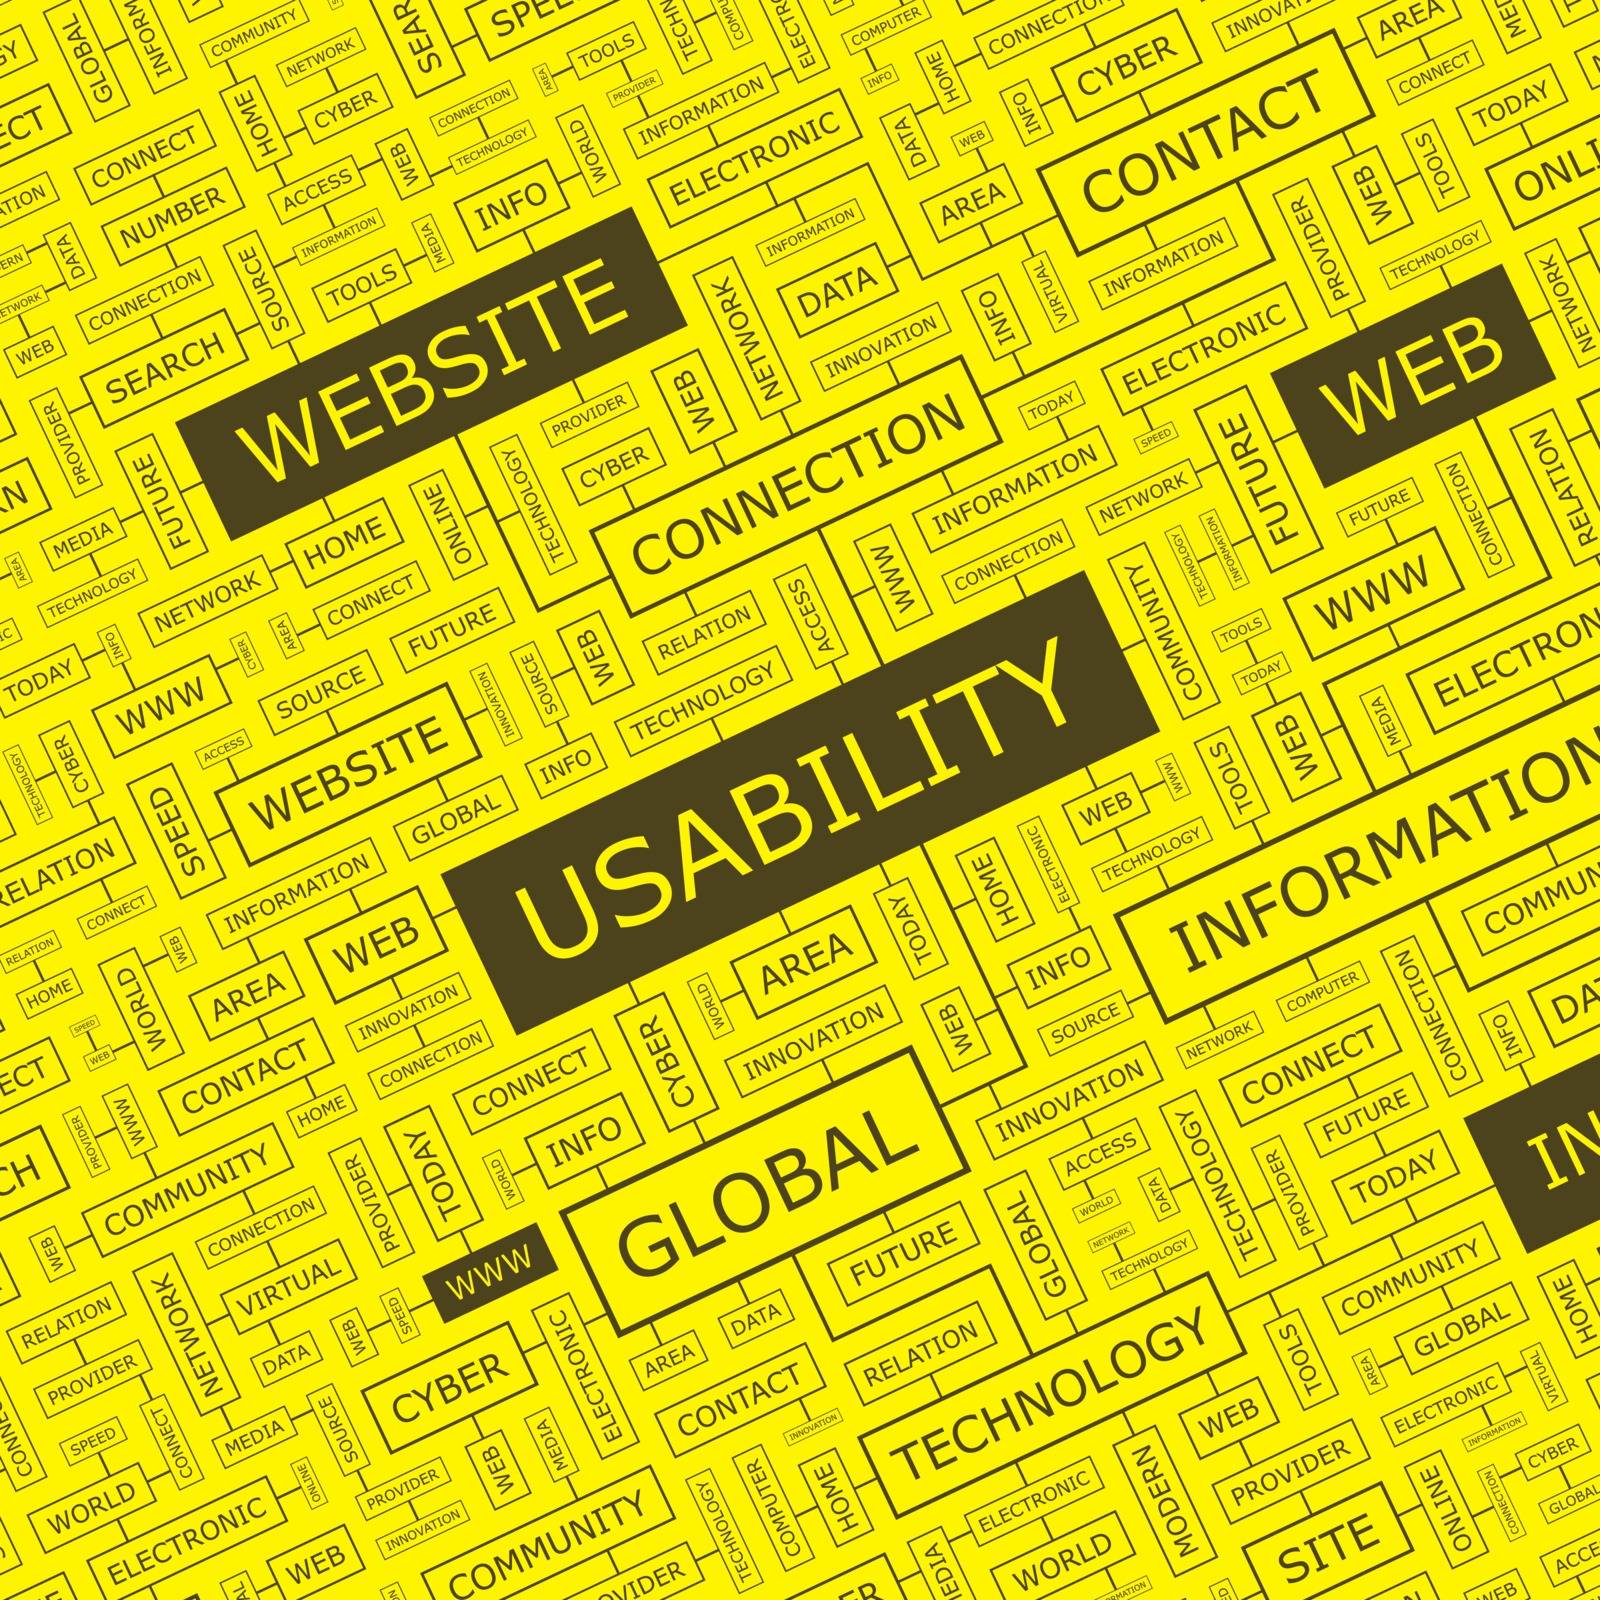 USABILITY. Word cloud illustration. Tag cloud concept collage.